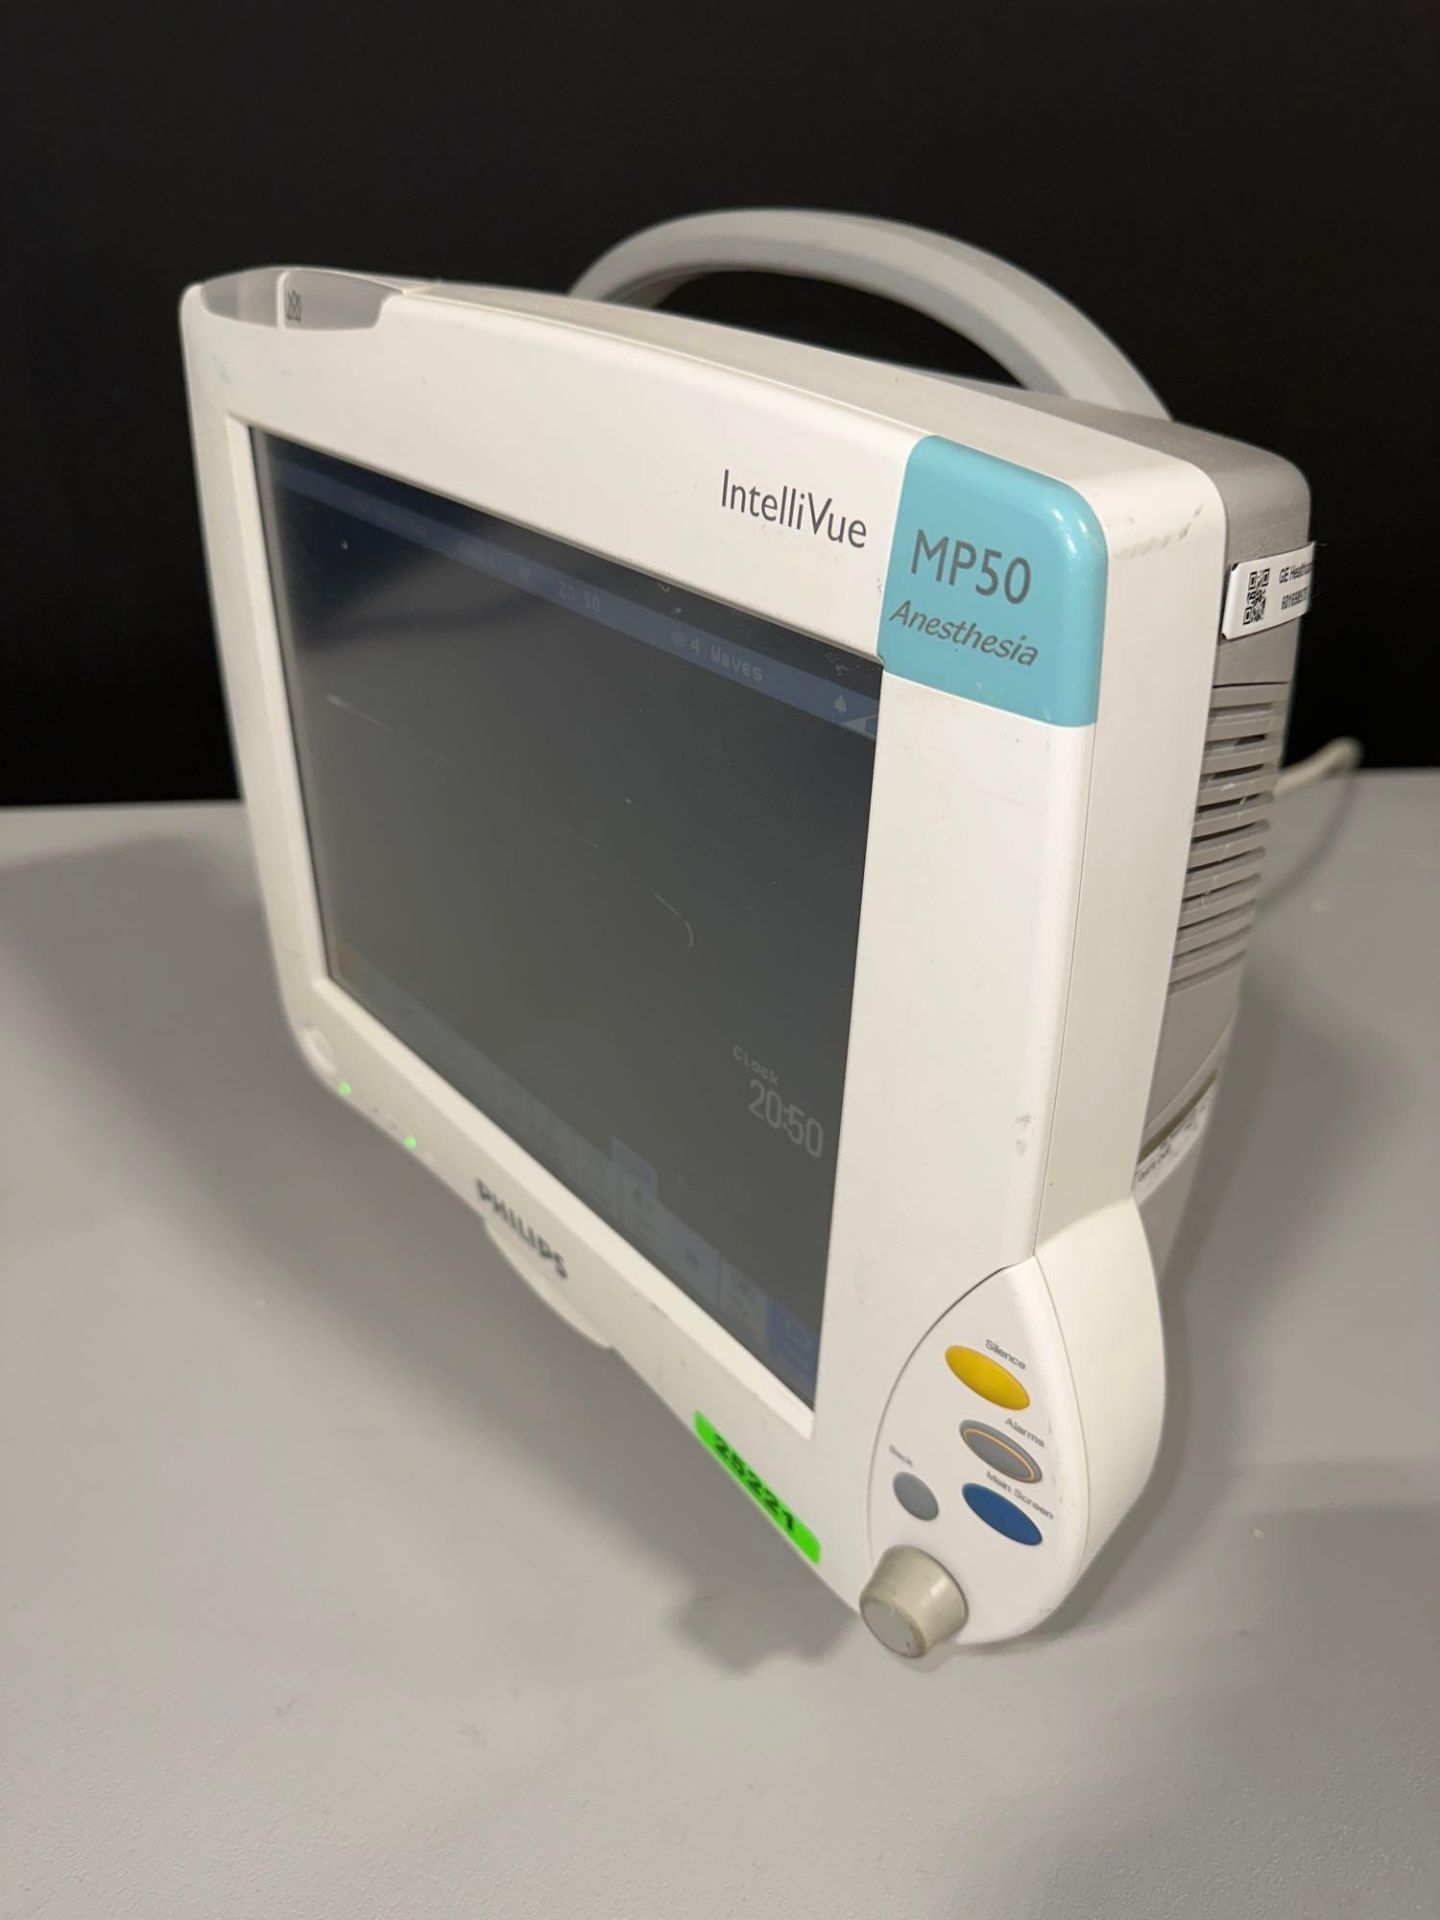 PHILIPS MP50 PATIENT MONITOR - Image 2 of 4